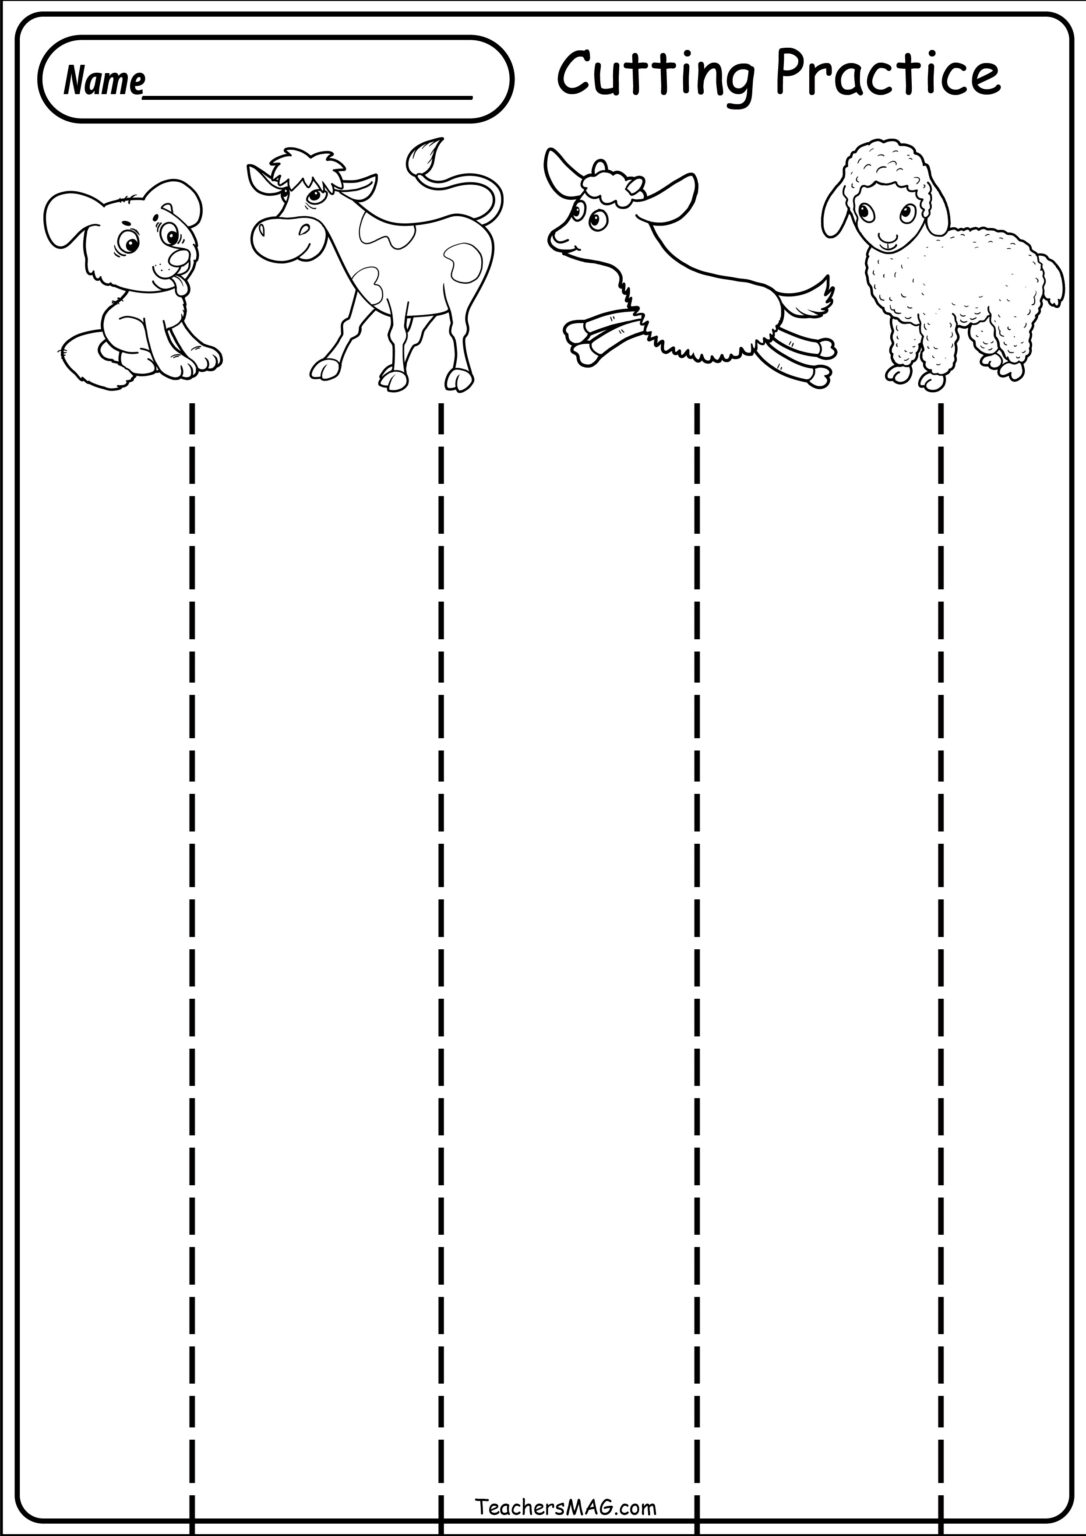 printable cutting and pasting worksheets for preschoolers pdf